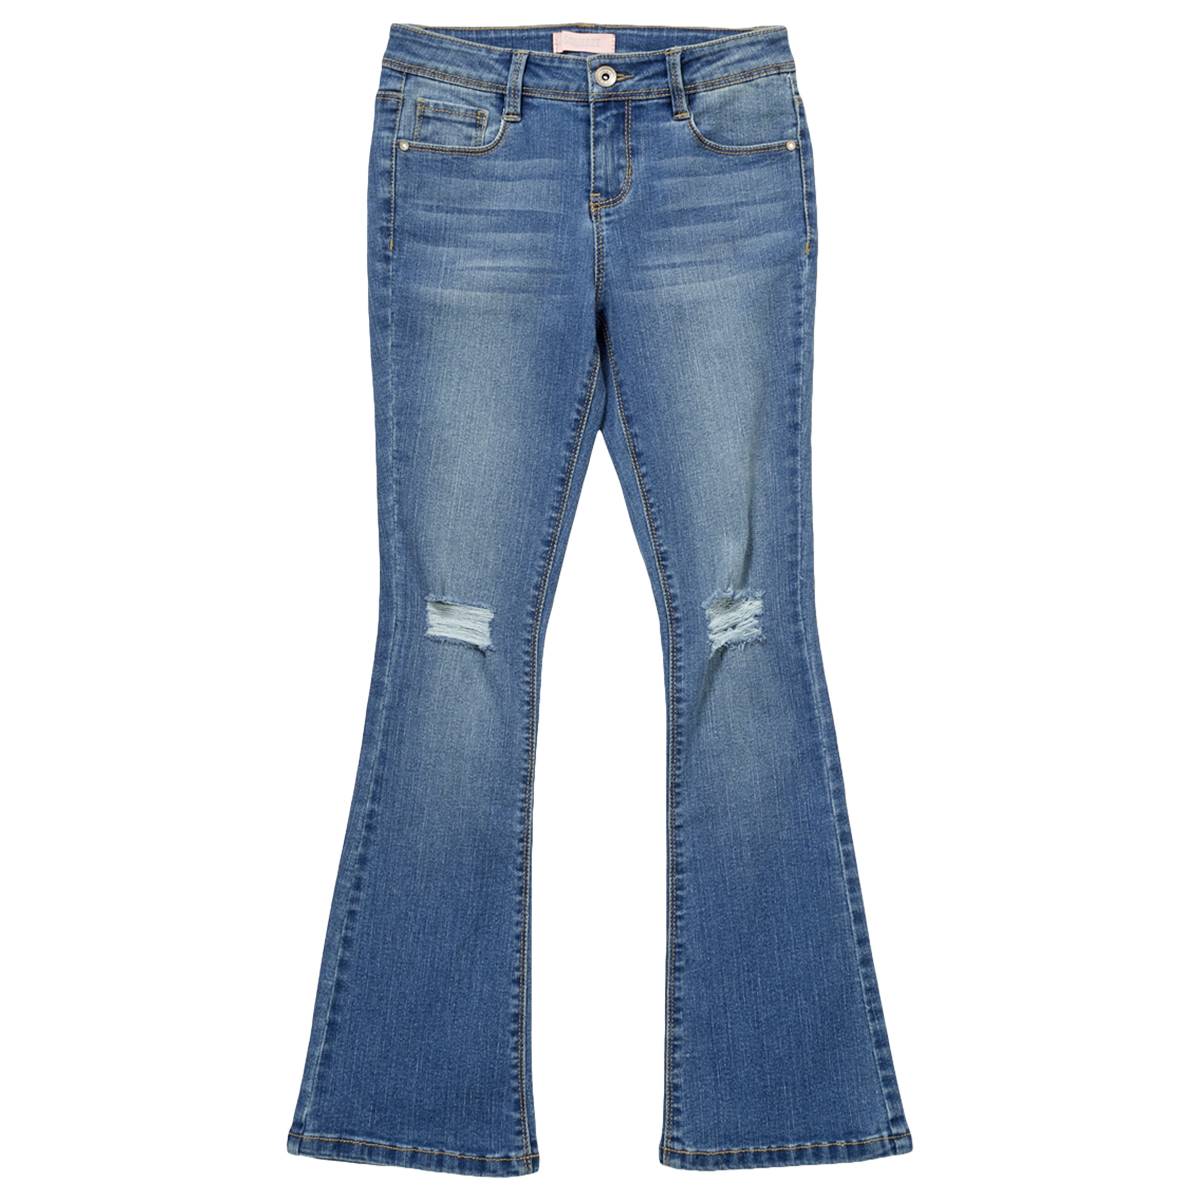 Girls (7-12) Squeeze Flared Jeans W/Knee Destruction